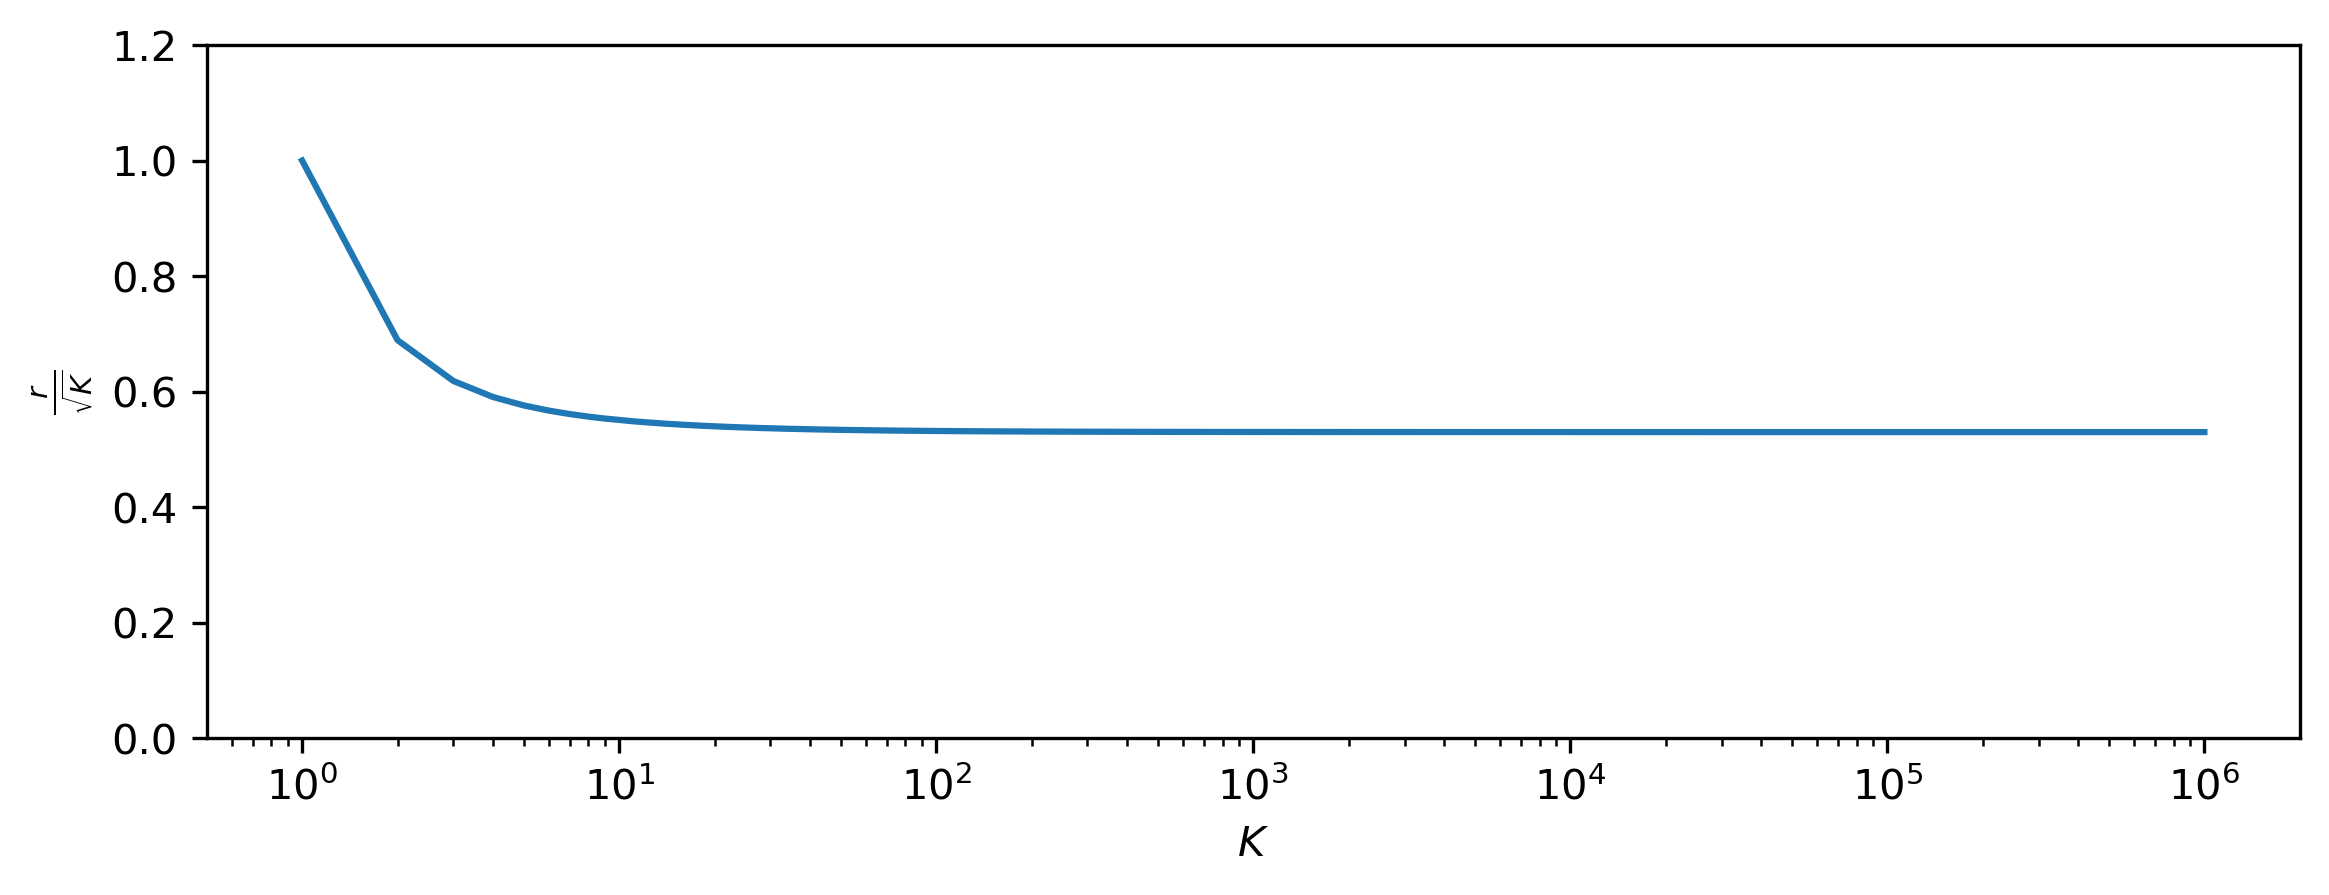 The distance from the mode at which the typical set of the Gaussian mirage is found, as a function of K.